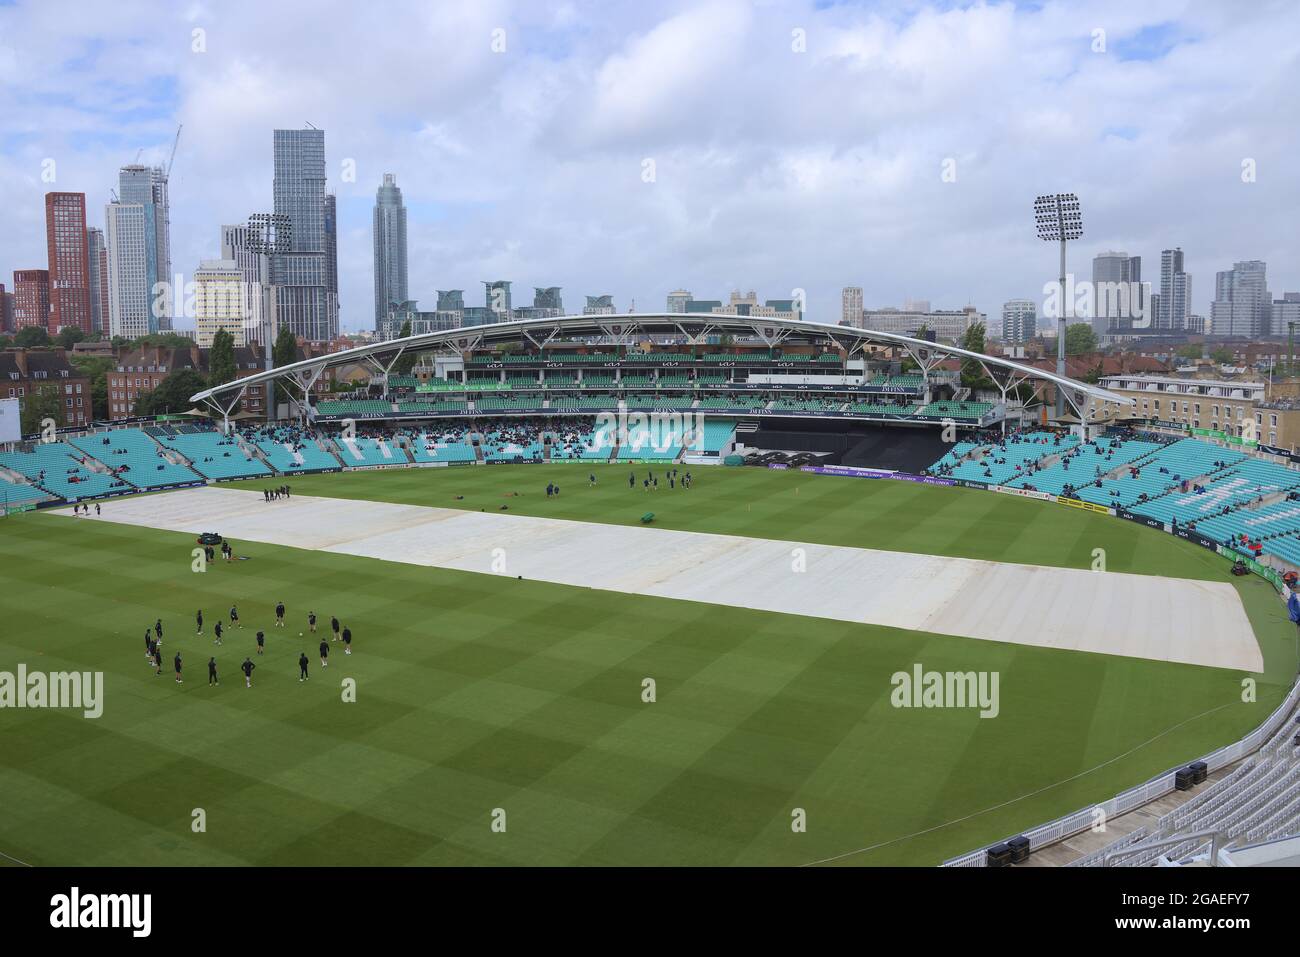 London, UK. 30th July, 2021. 30 July, 2021. London, UK. The newly named JM Finn stand as rain delays the start of play as Surrey take on Northamptonshire in the Royal London One-day Cup at the Kia Oval. David Rowe/ Alamy Live News Credit: David Rowe/Alamy Live News Stock Photo